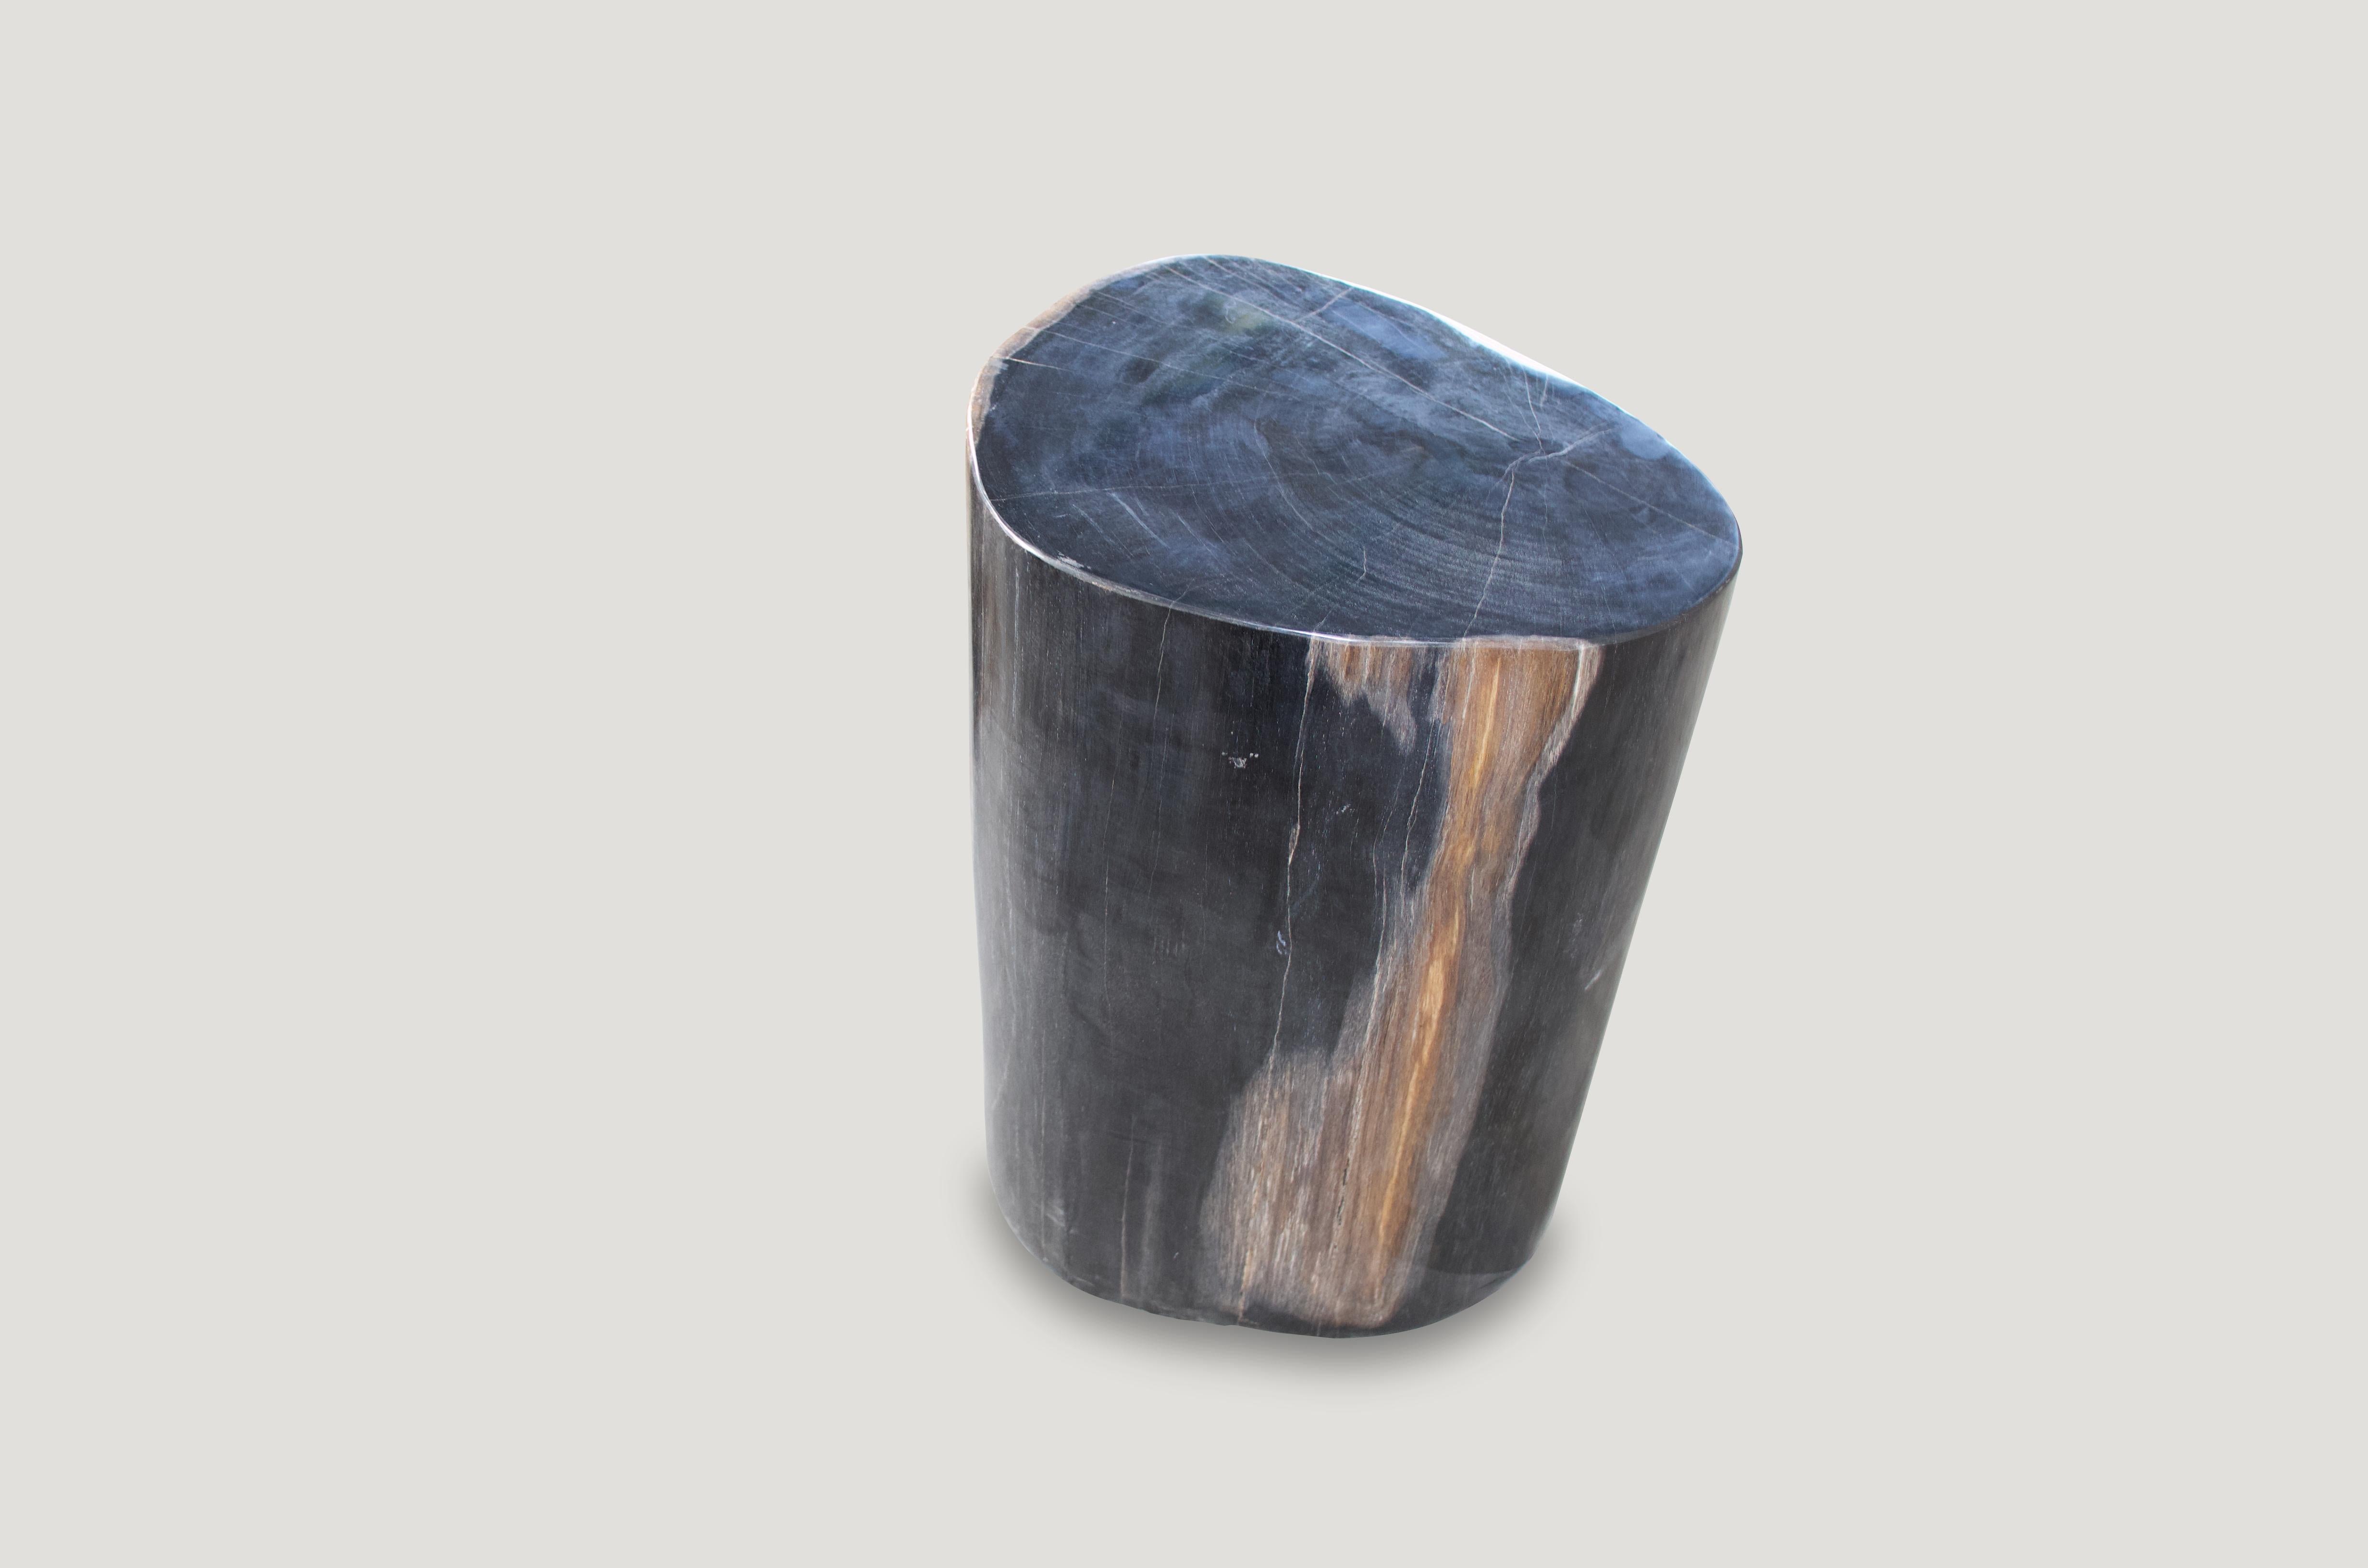 We have a pair of these rare, super smooth, contrasting toned petrified wood side tables, cut from the same log. The price represents the one shown.

As with a diamond, we polish the highest quality fossilized petrified wood, using our latest